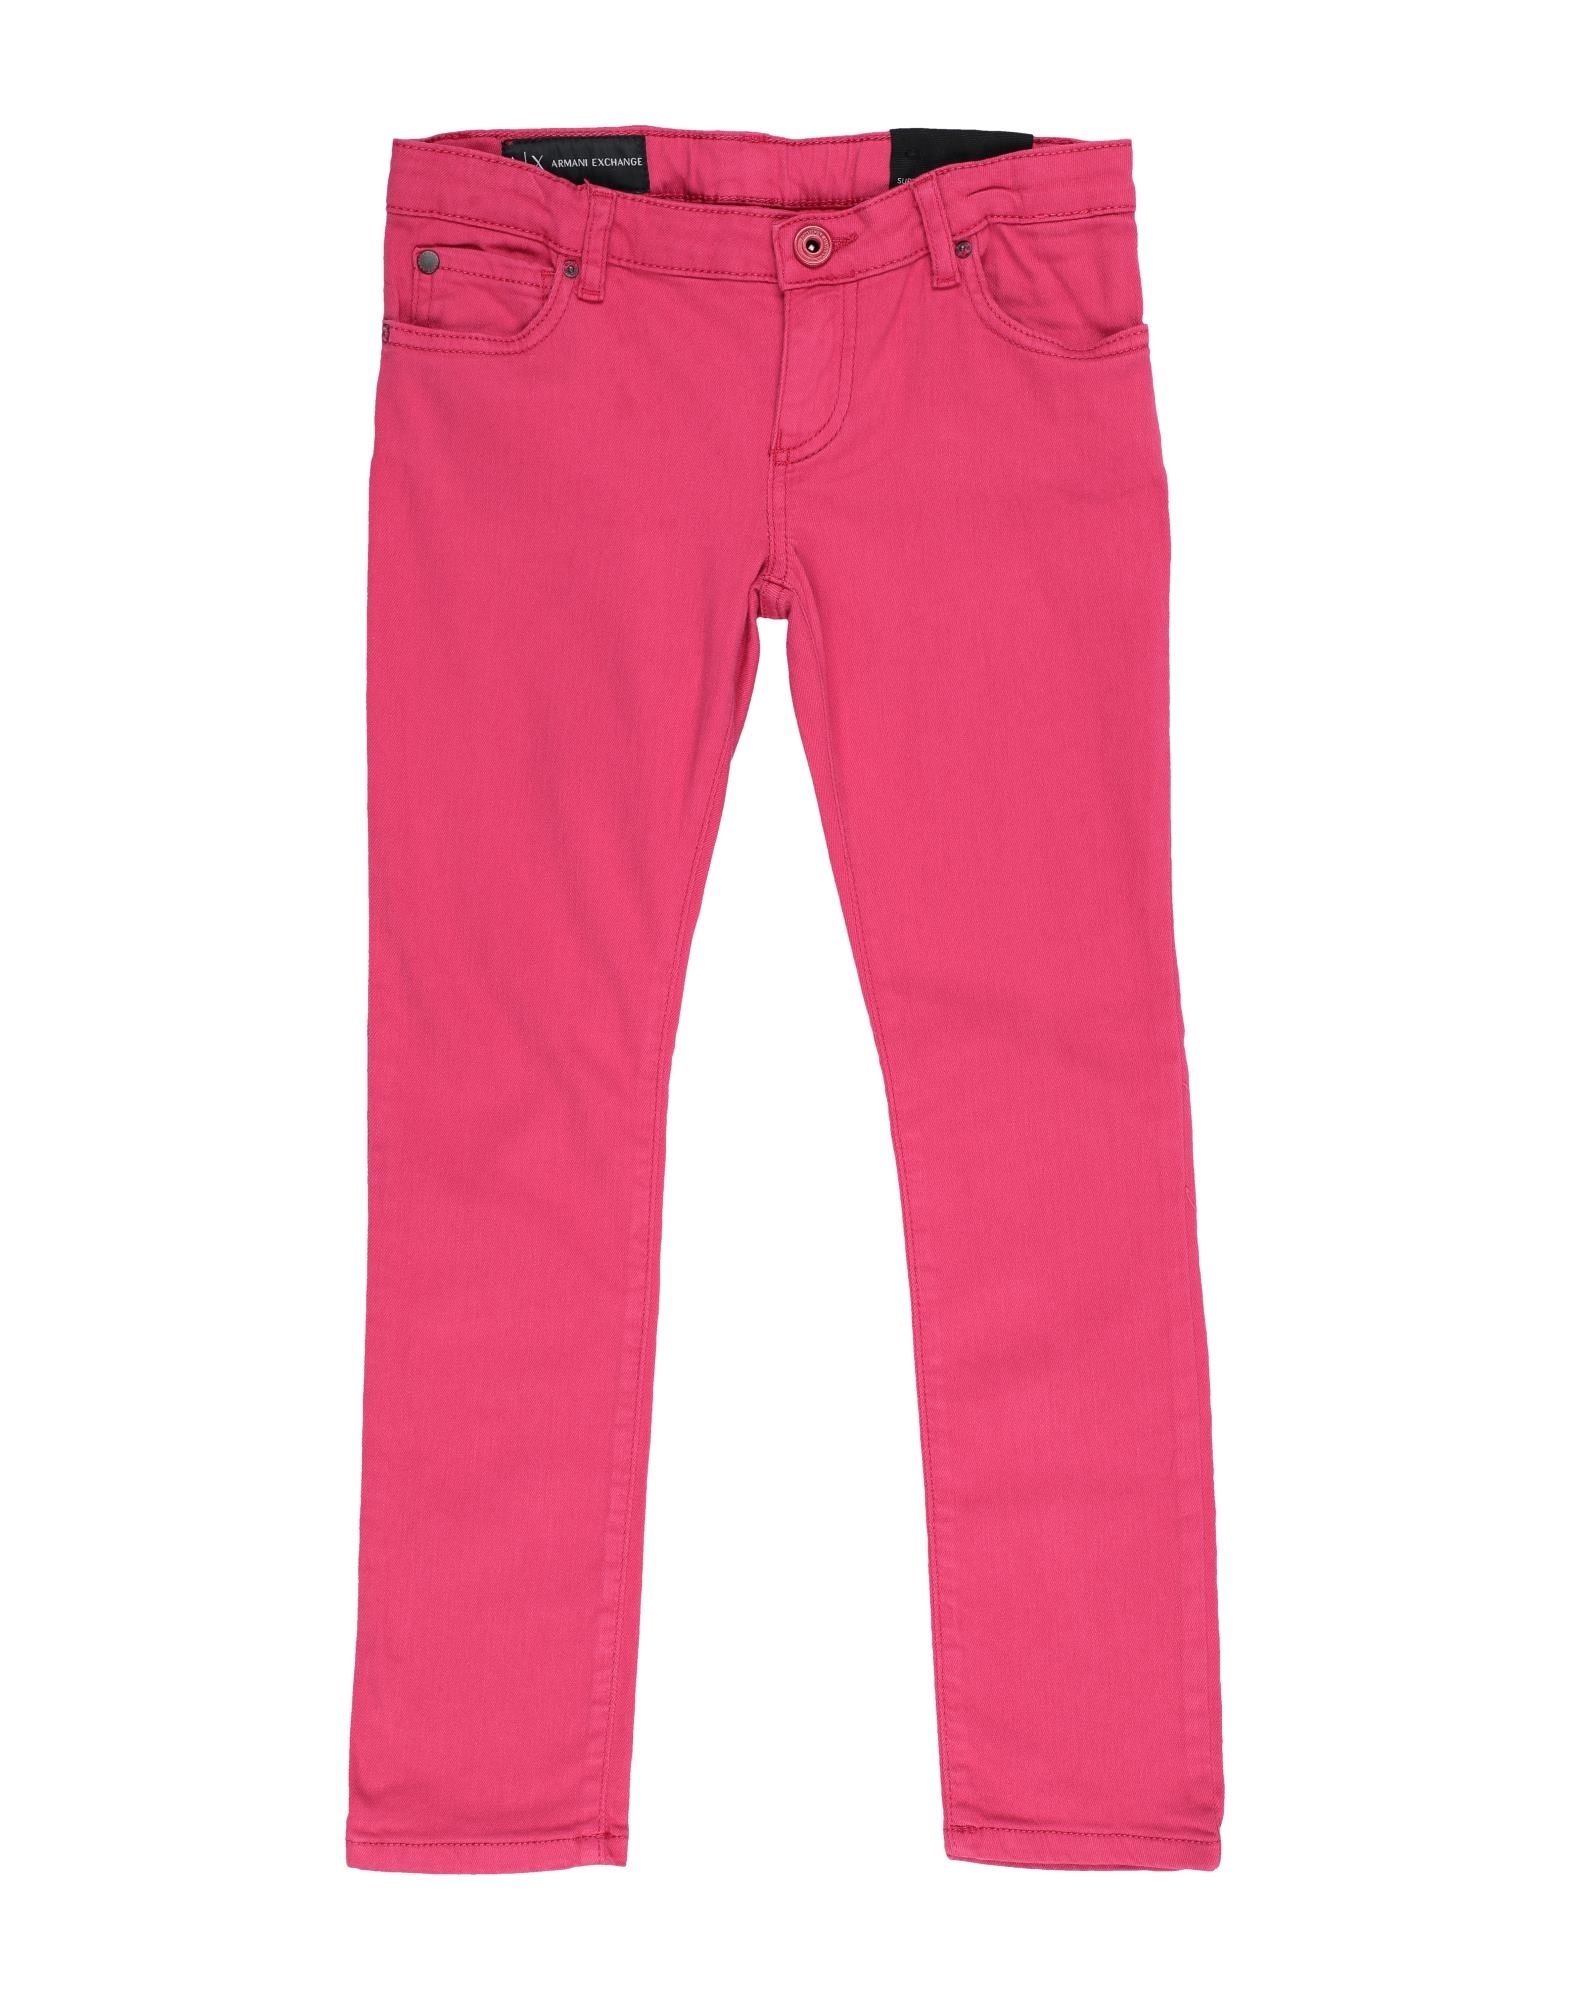 Armani Exchange Kids' Jeans In Pink